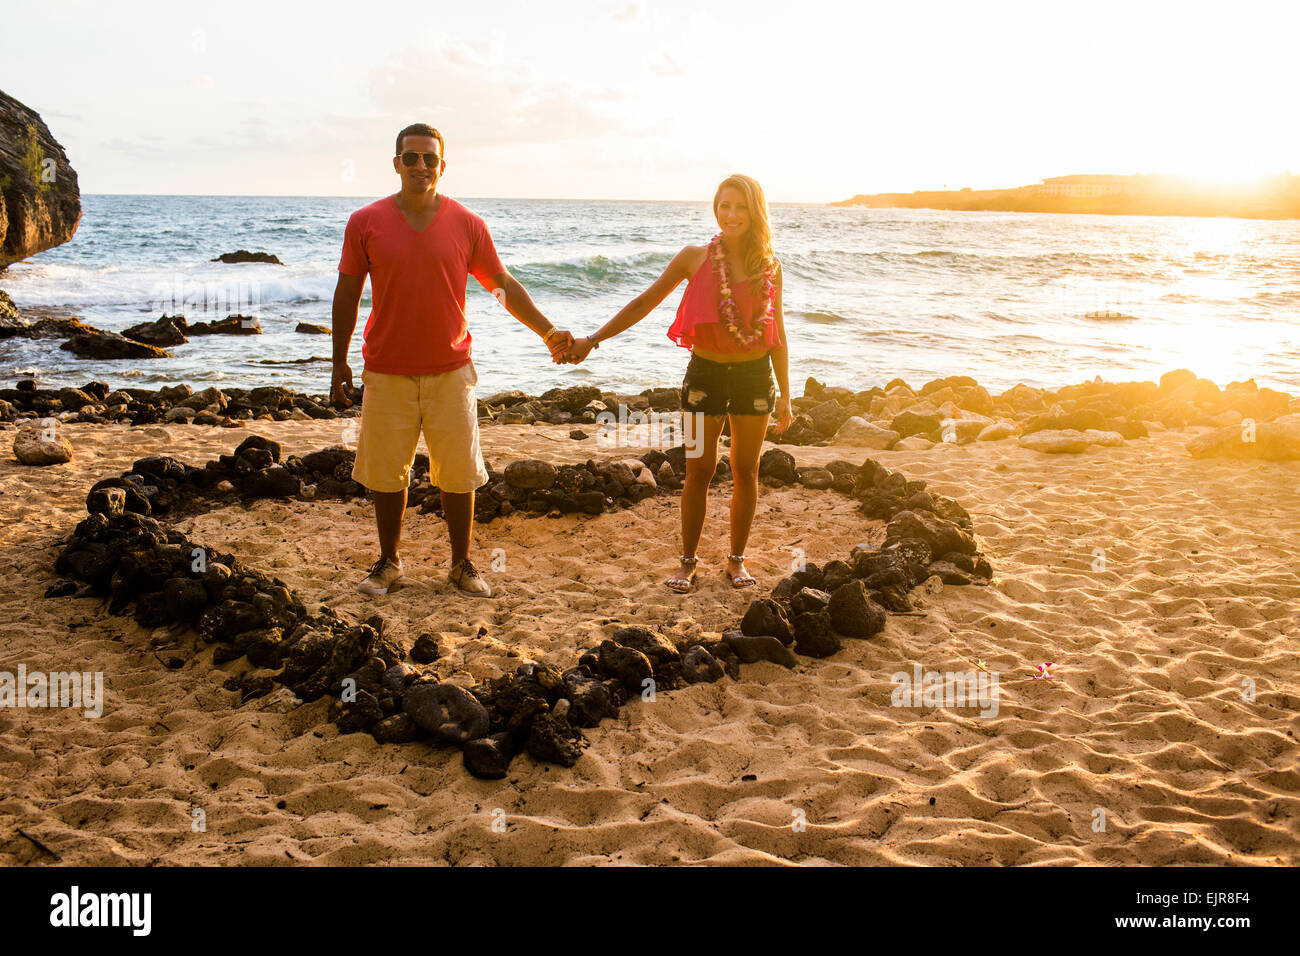 Couple holding hands in heart shape on beach Stock Photo